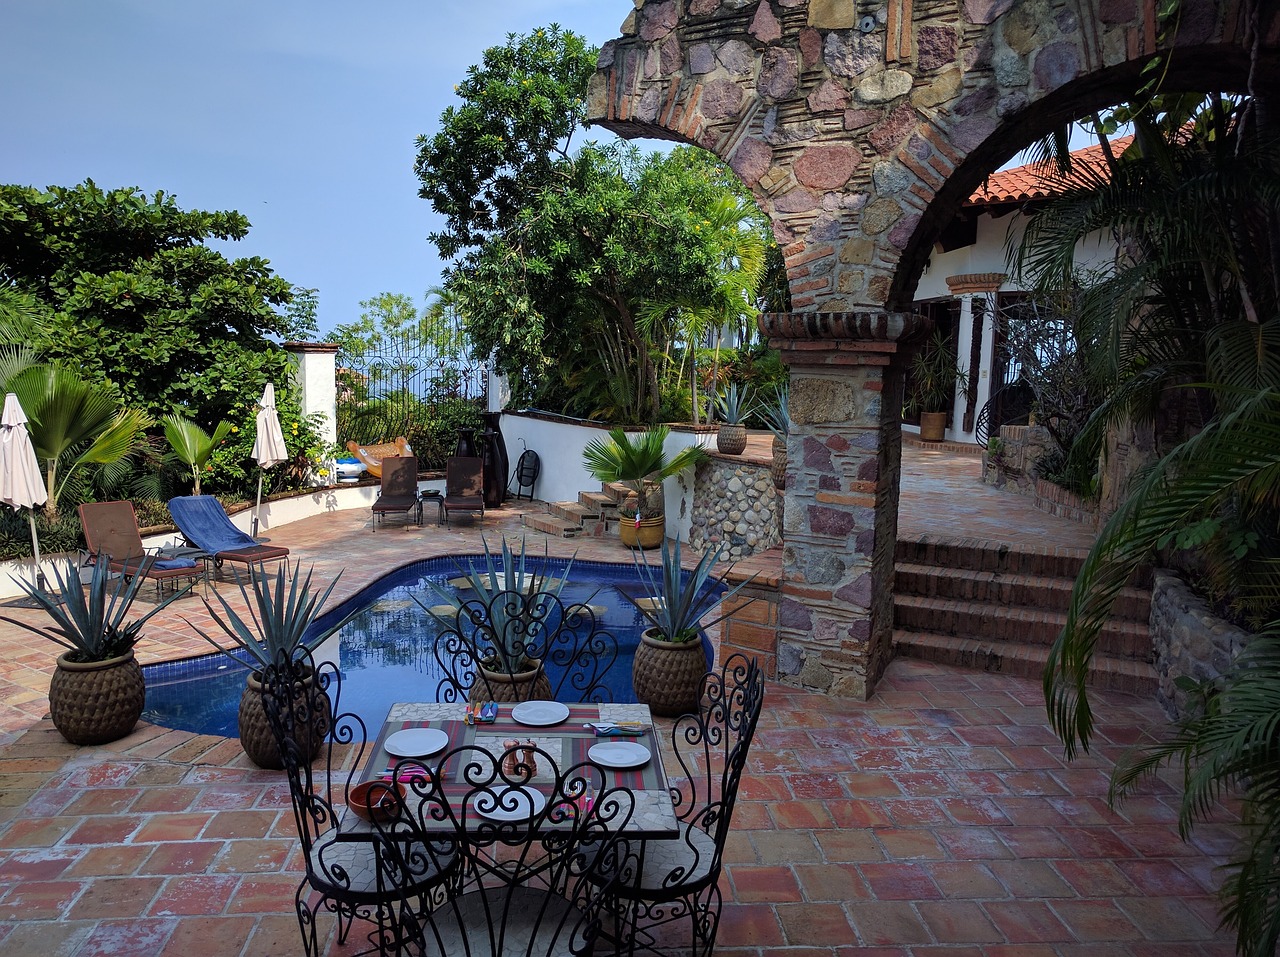 Puerto Vallarta: A Blend of Culture and Coastline for a Fascinating Mexican Experience